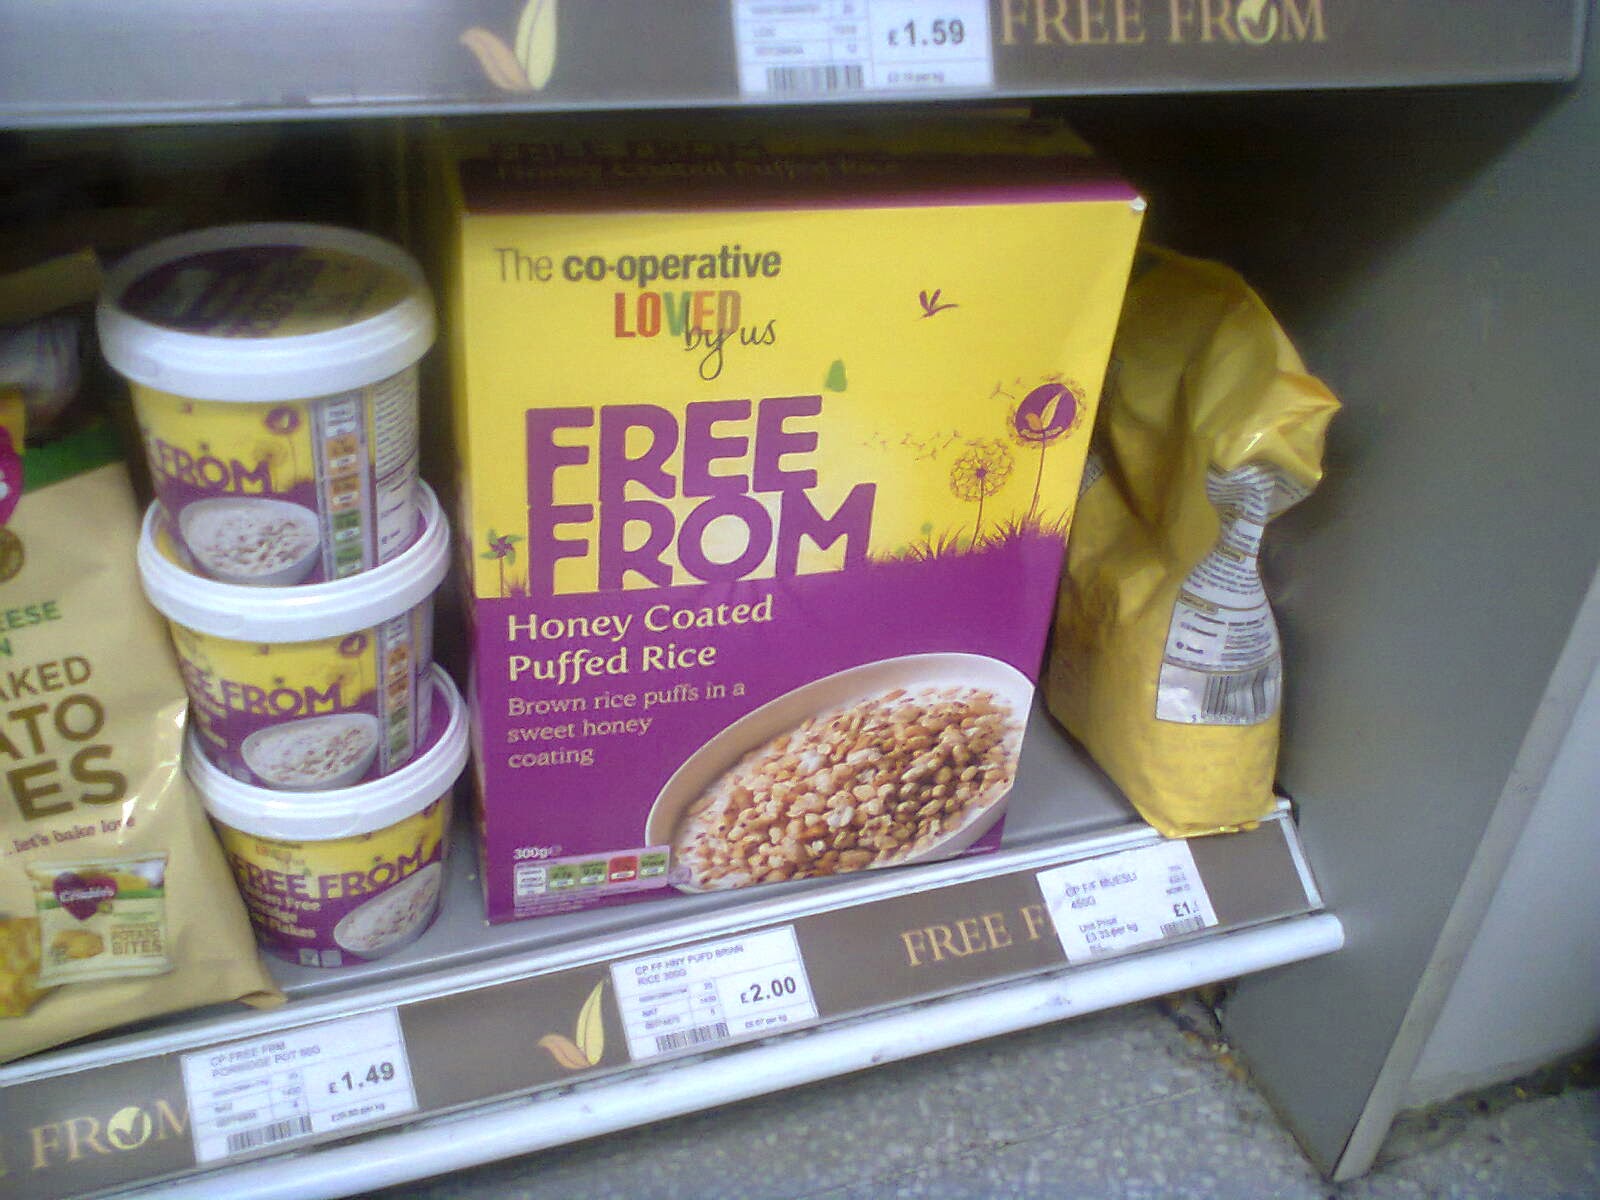 Free From cereal at the Co-operative